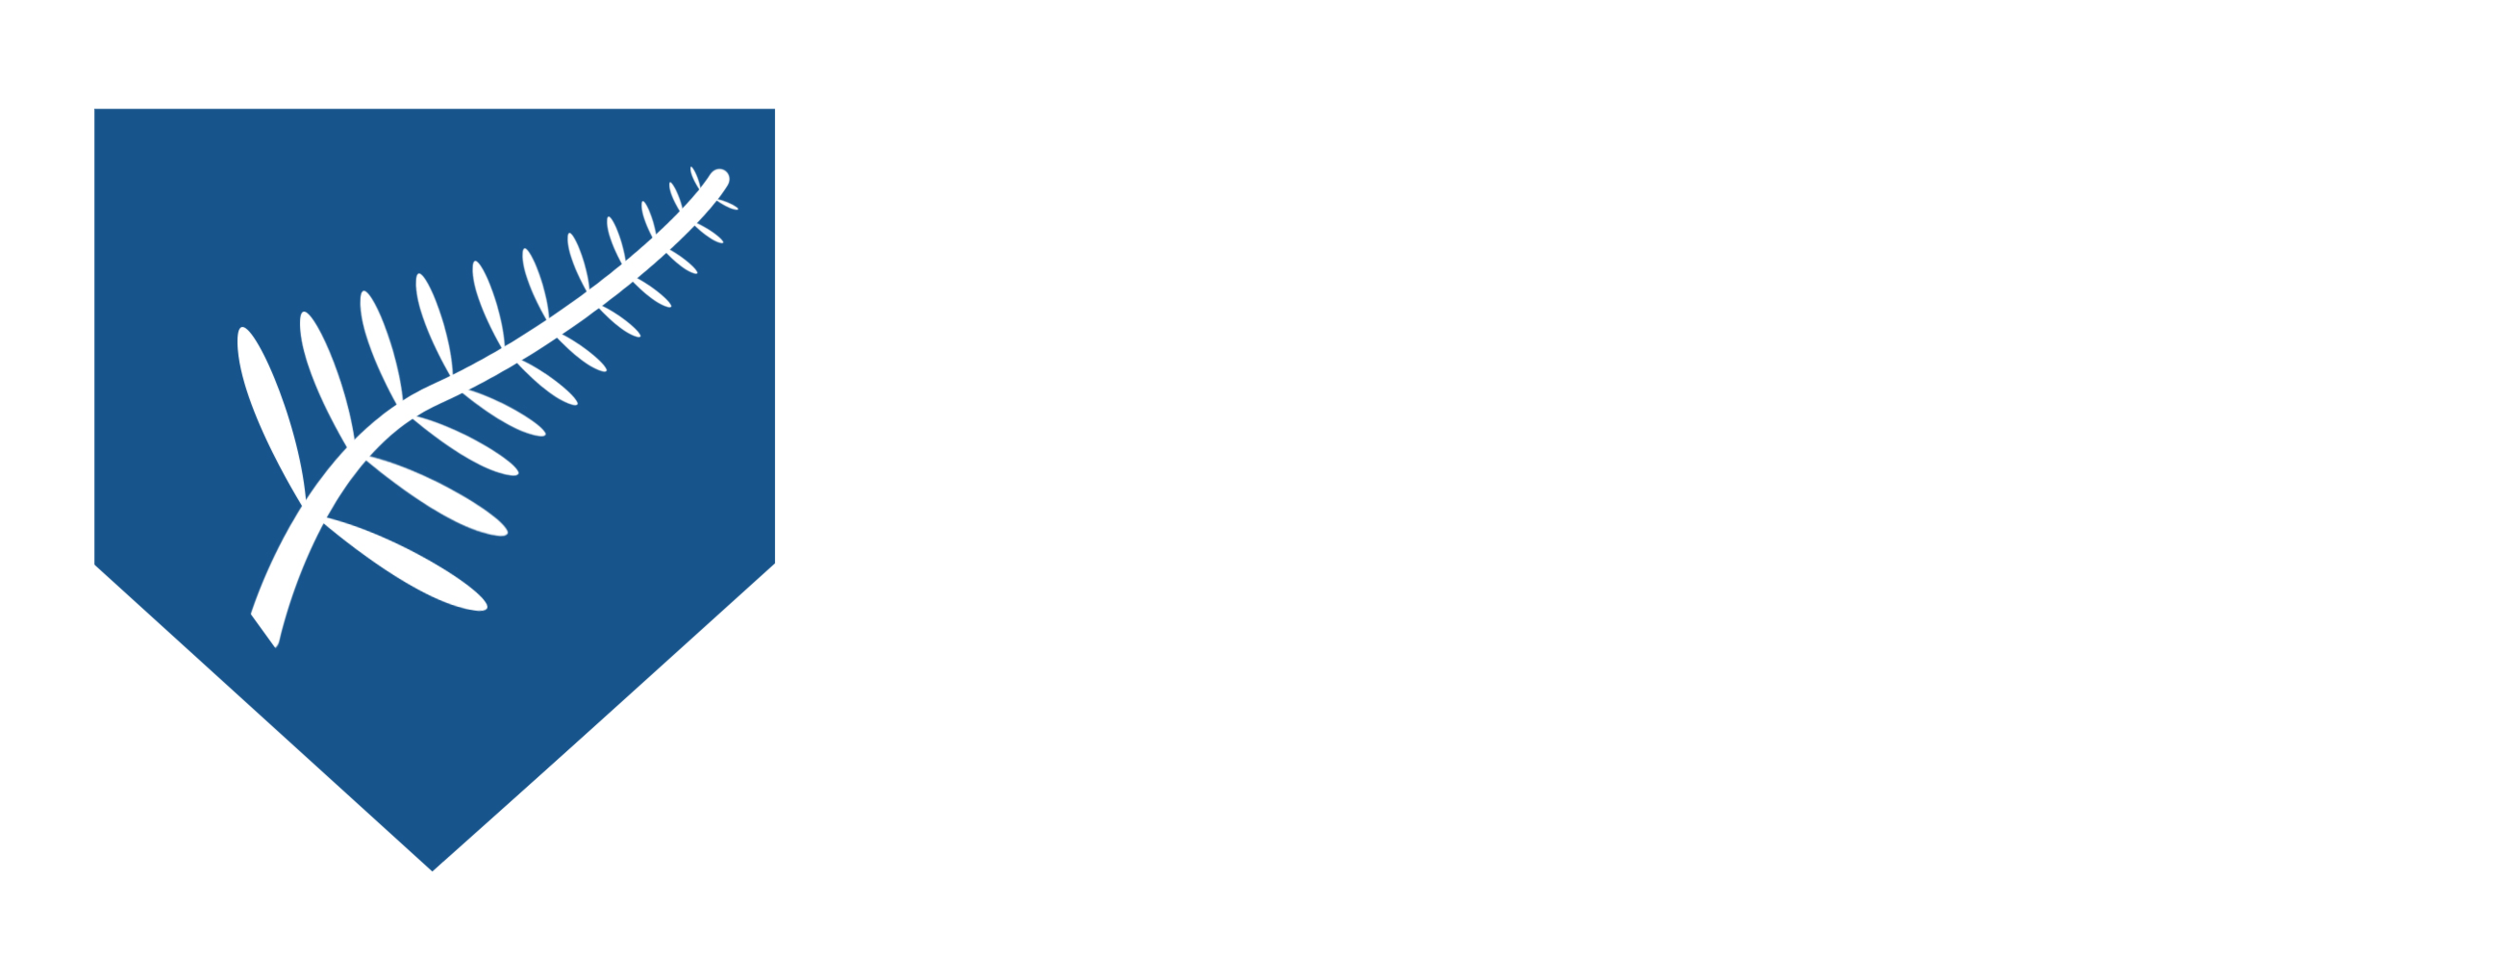 New Zealand Education Group - University &amp; Course Consultants